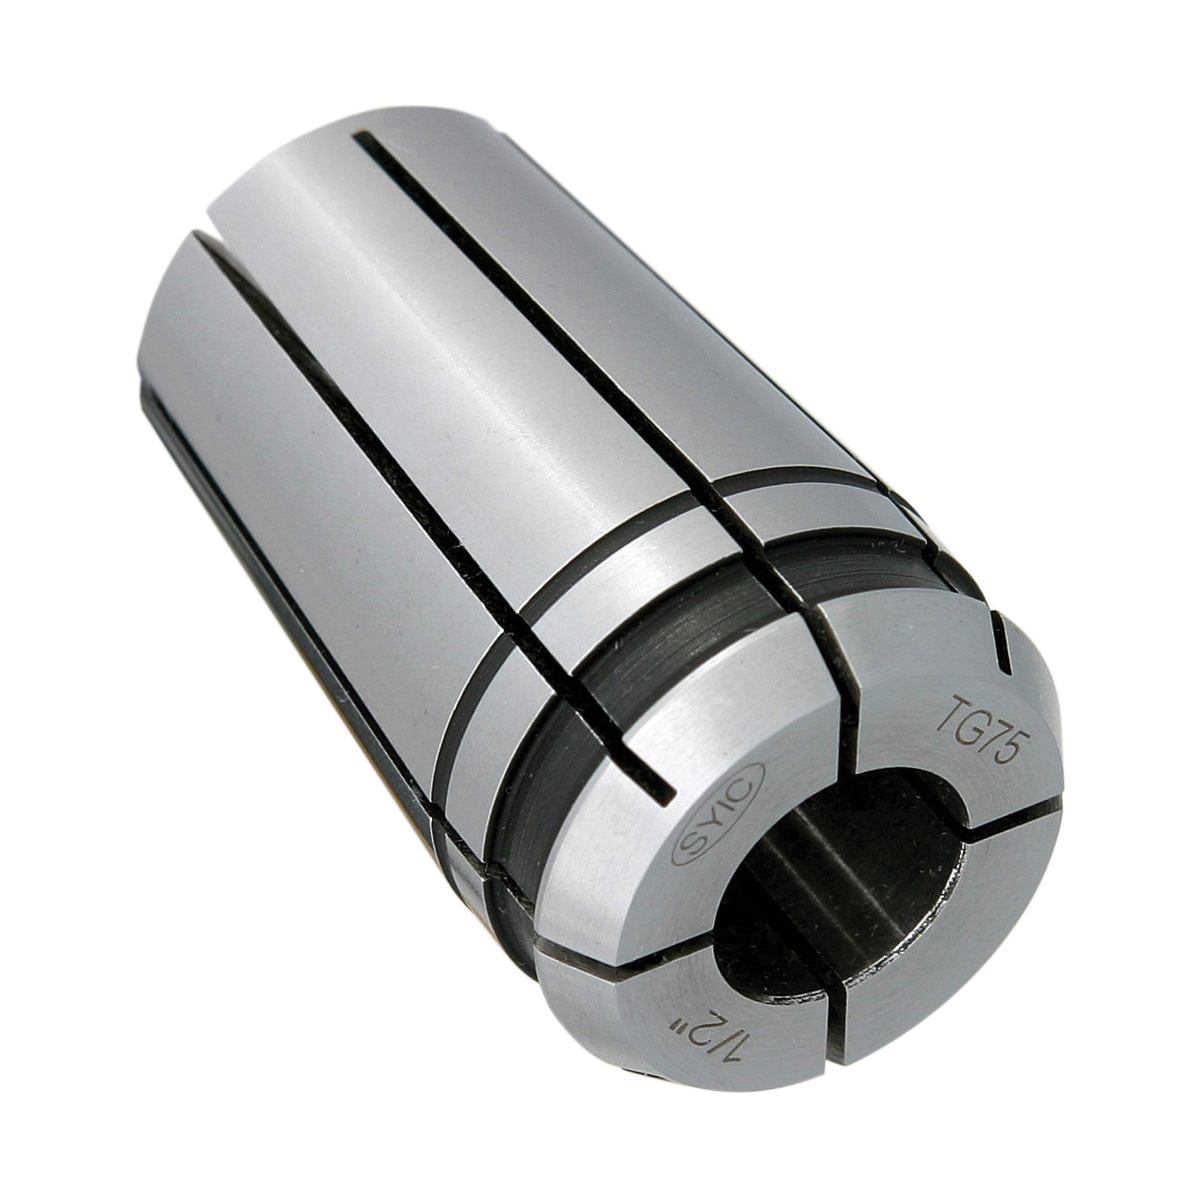 TG75 7/16" COLLET